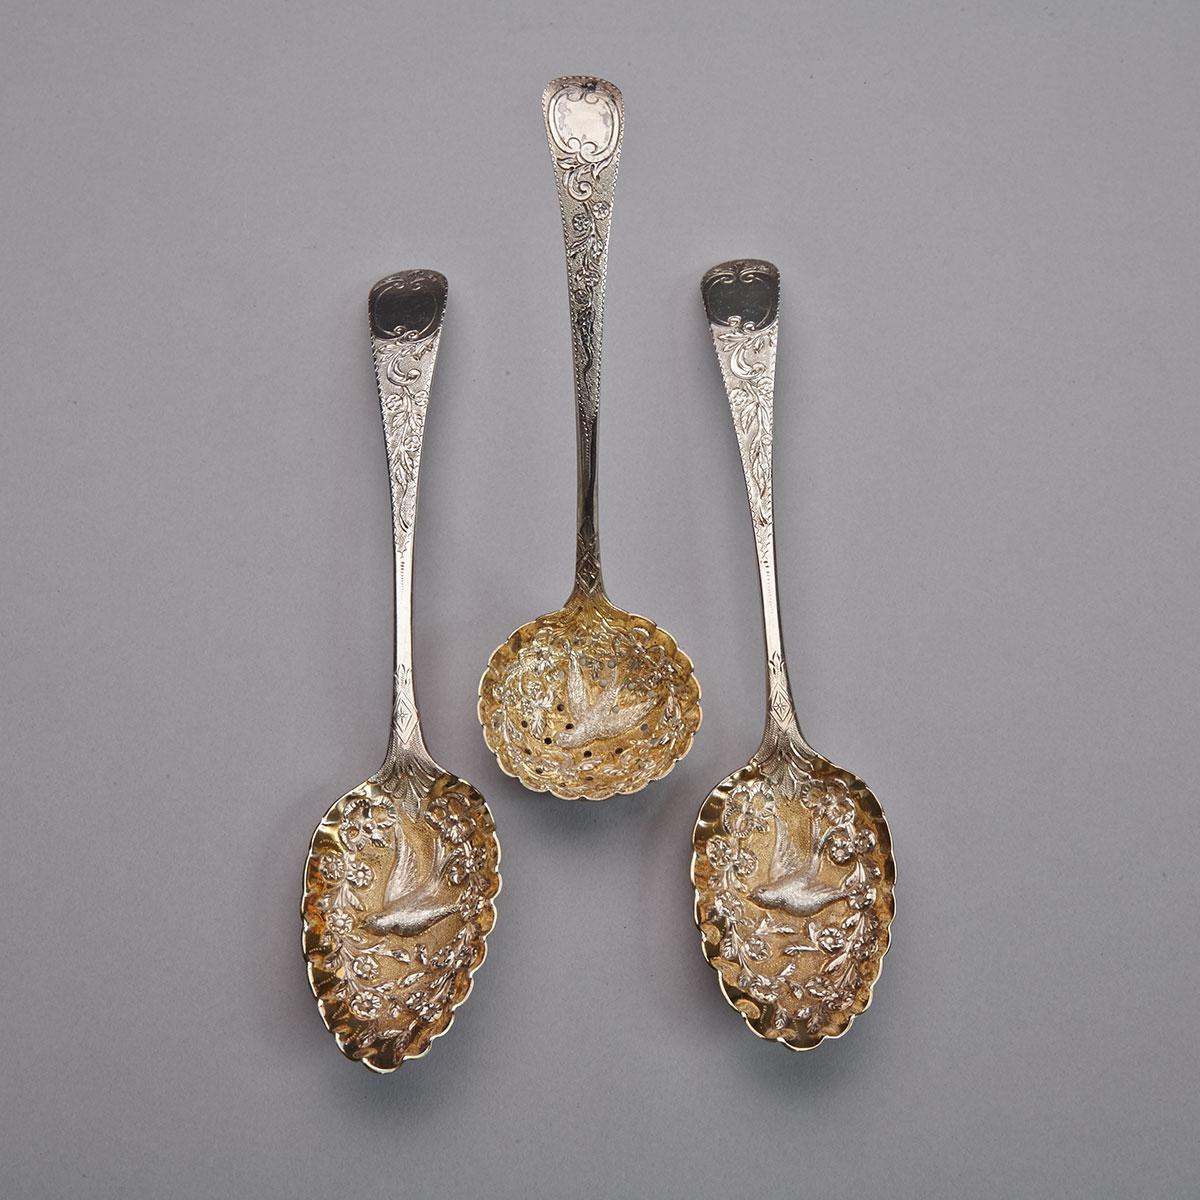 Pair of George III Silver Berry Spoons and a Sugar Sifting Ladle, Peter, Ann & William Bateman and Samuel Eaton, London 1803 and 1763